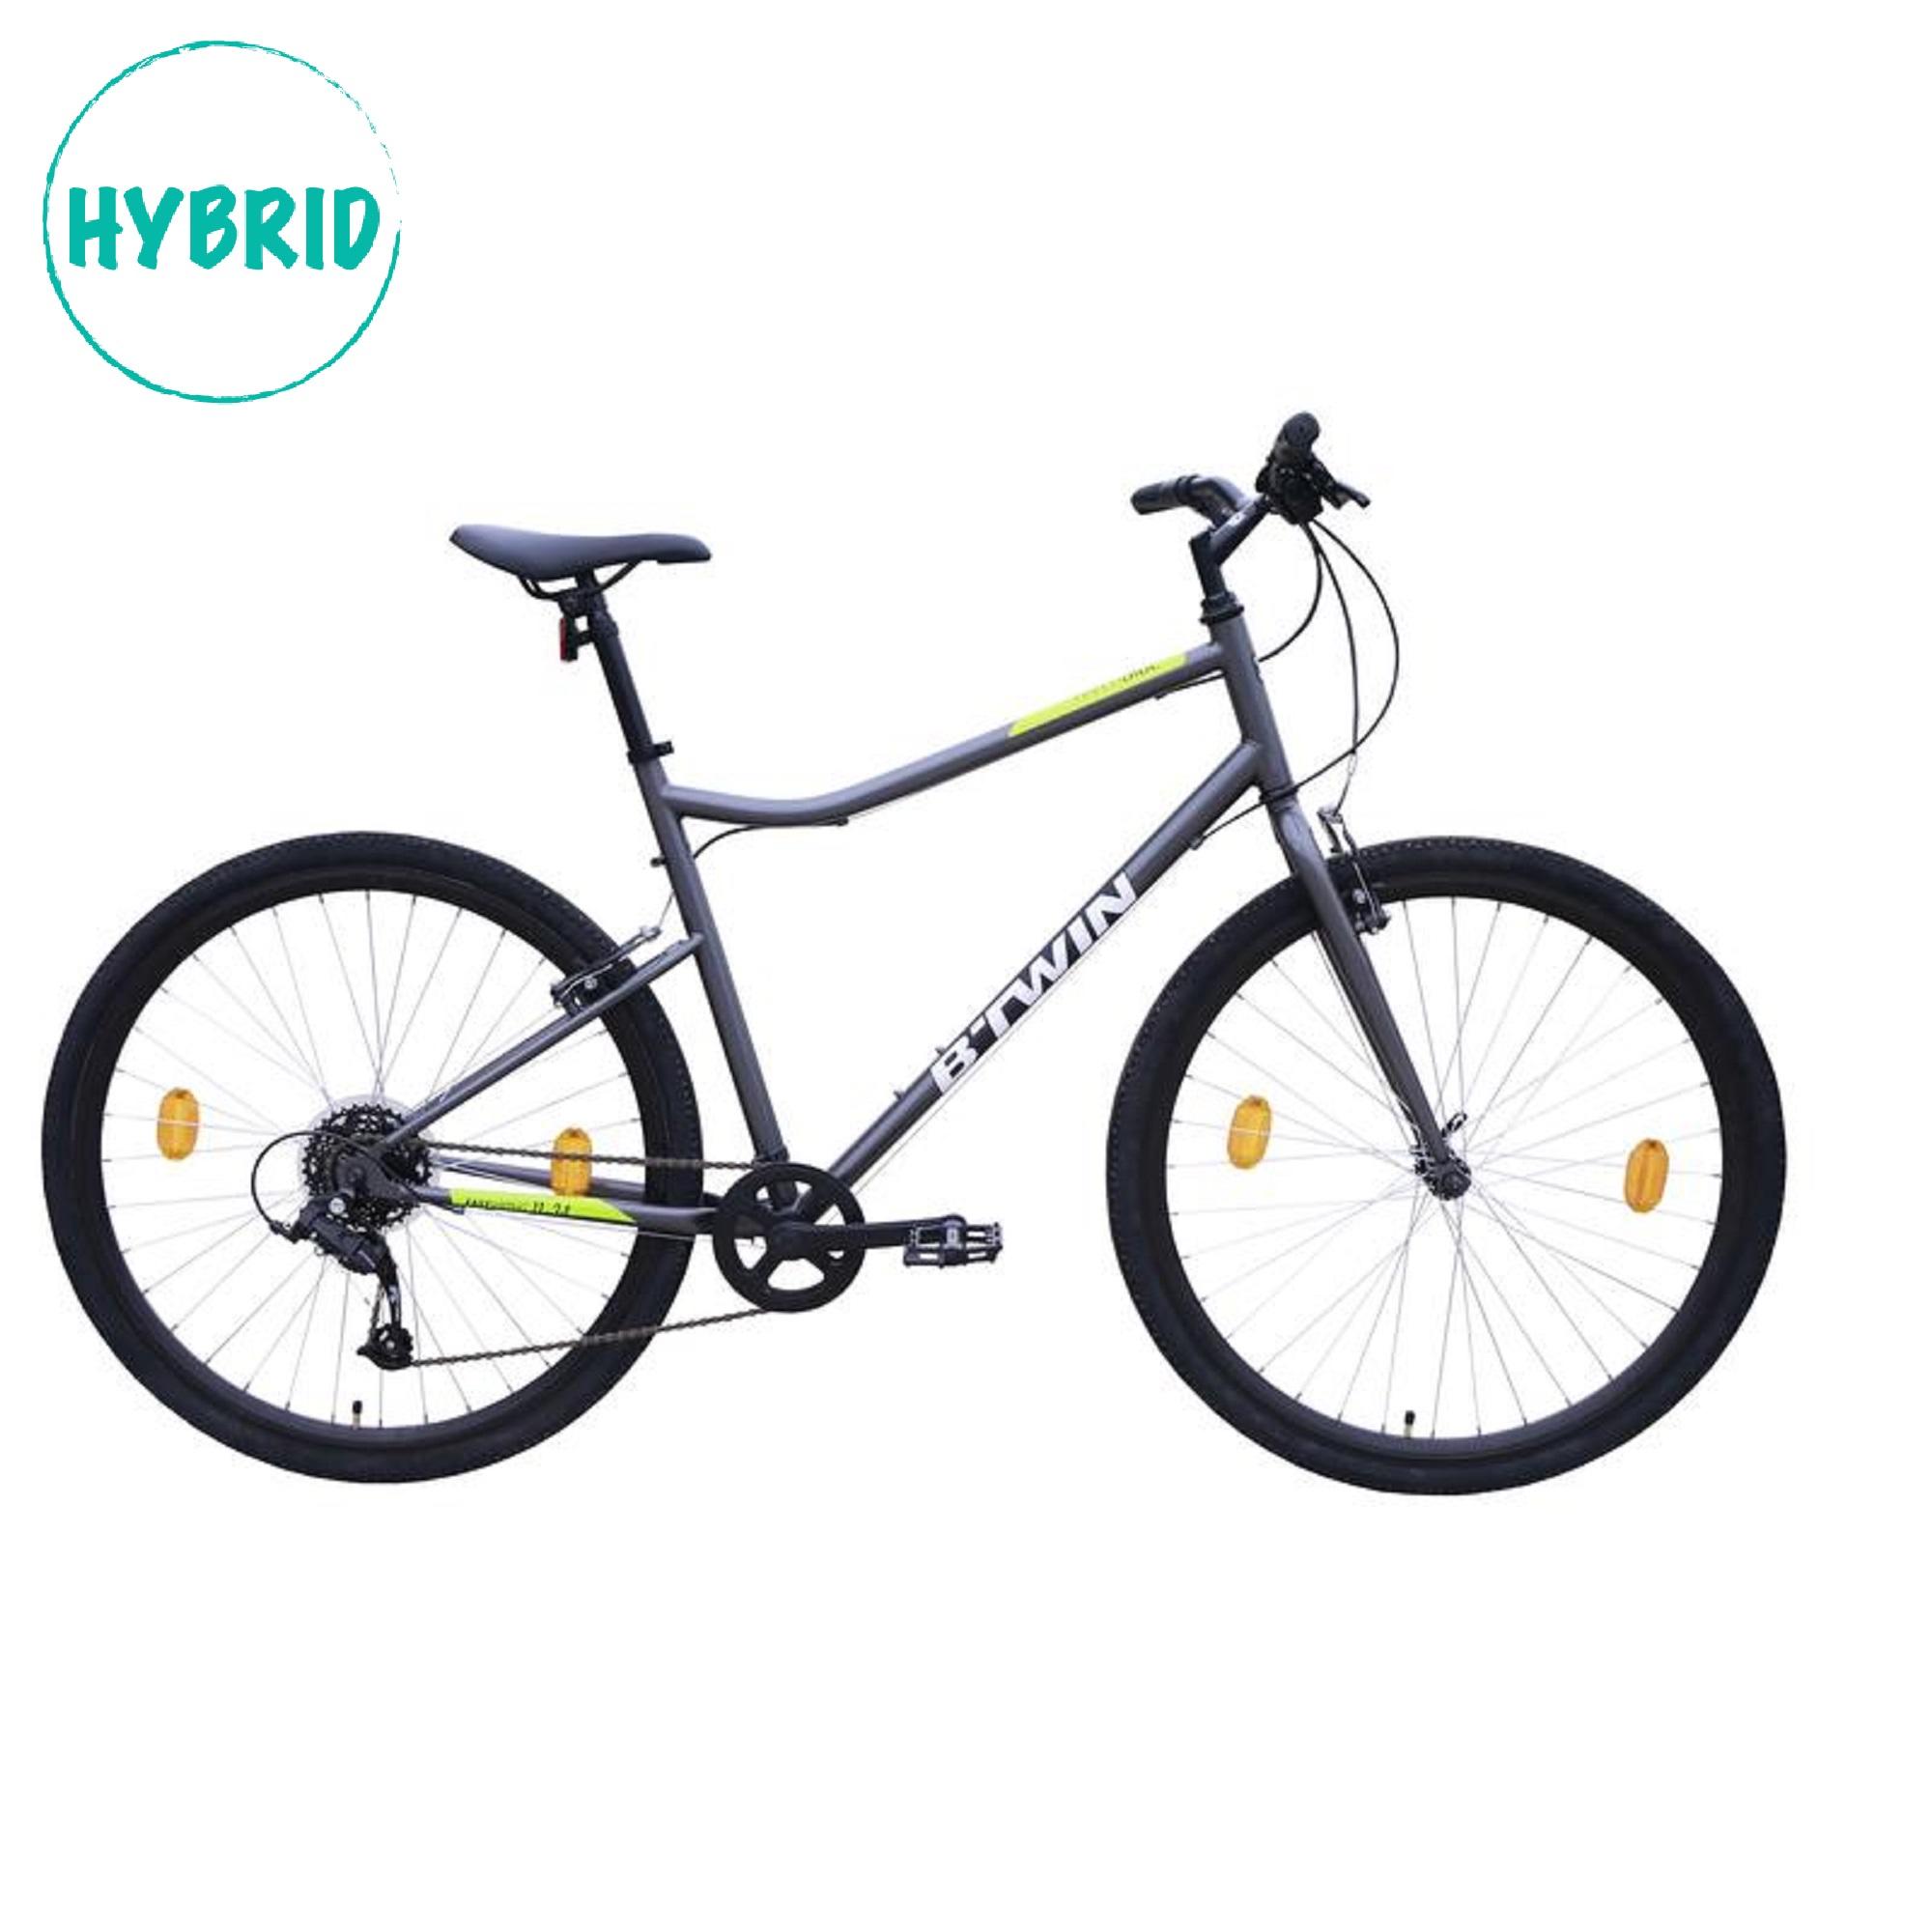 btwin riverside 120 hybrid cycle review